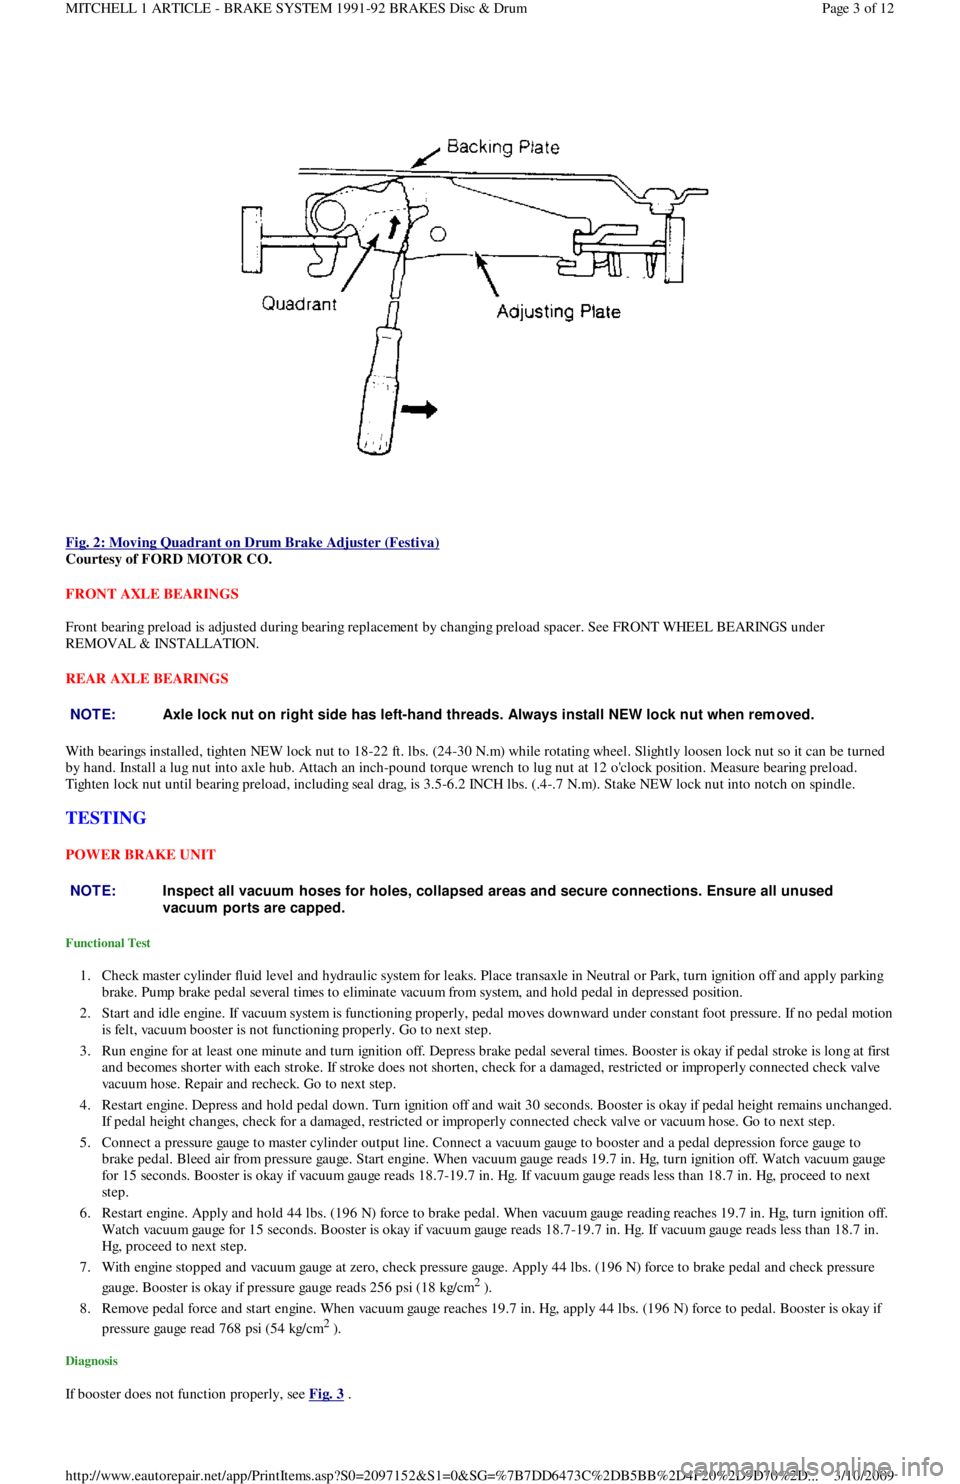 FORD FESTIVA 1991 Owners Manual  
Fig. 2: Moving Quadrant on Drum Brake Adjuster (Festiva)
 
Courtesy of FORD MOTOR CO. 
FRONT AXLE BEARINGS 
Front bearing preload is adjusted during bearing replacement by changing preload spacer. S